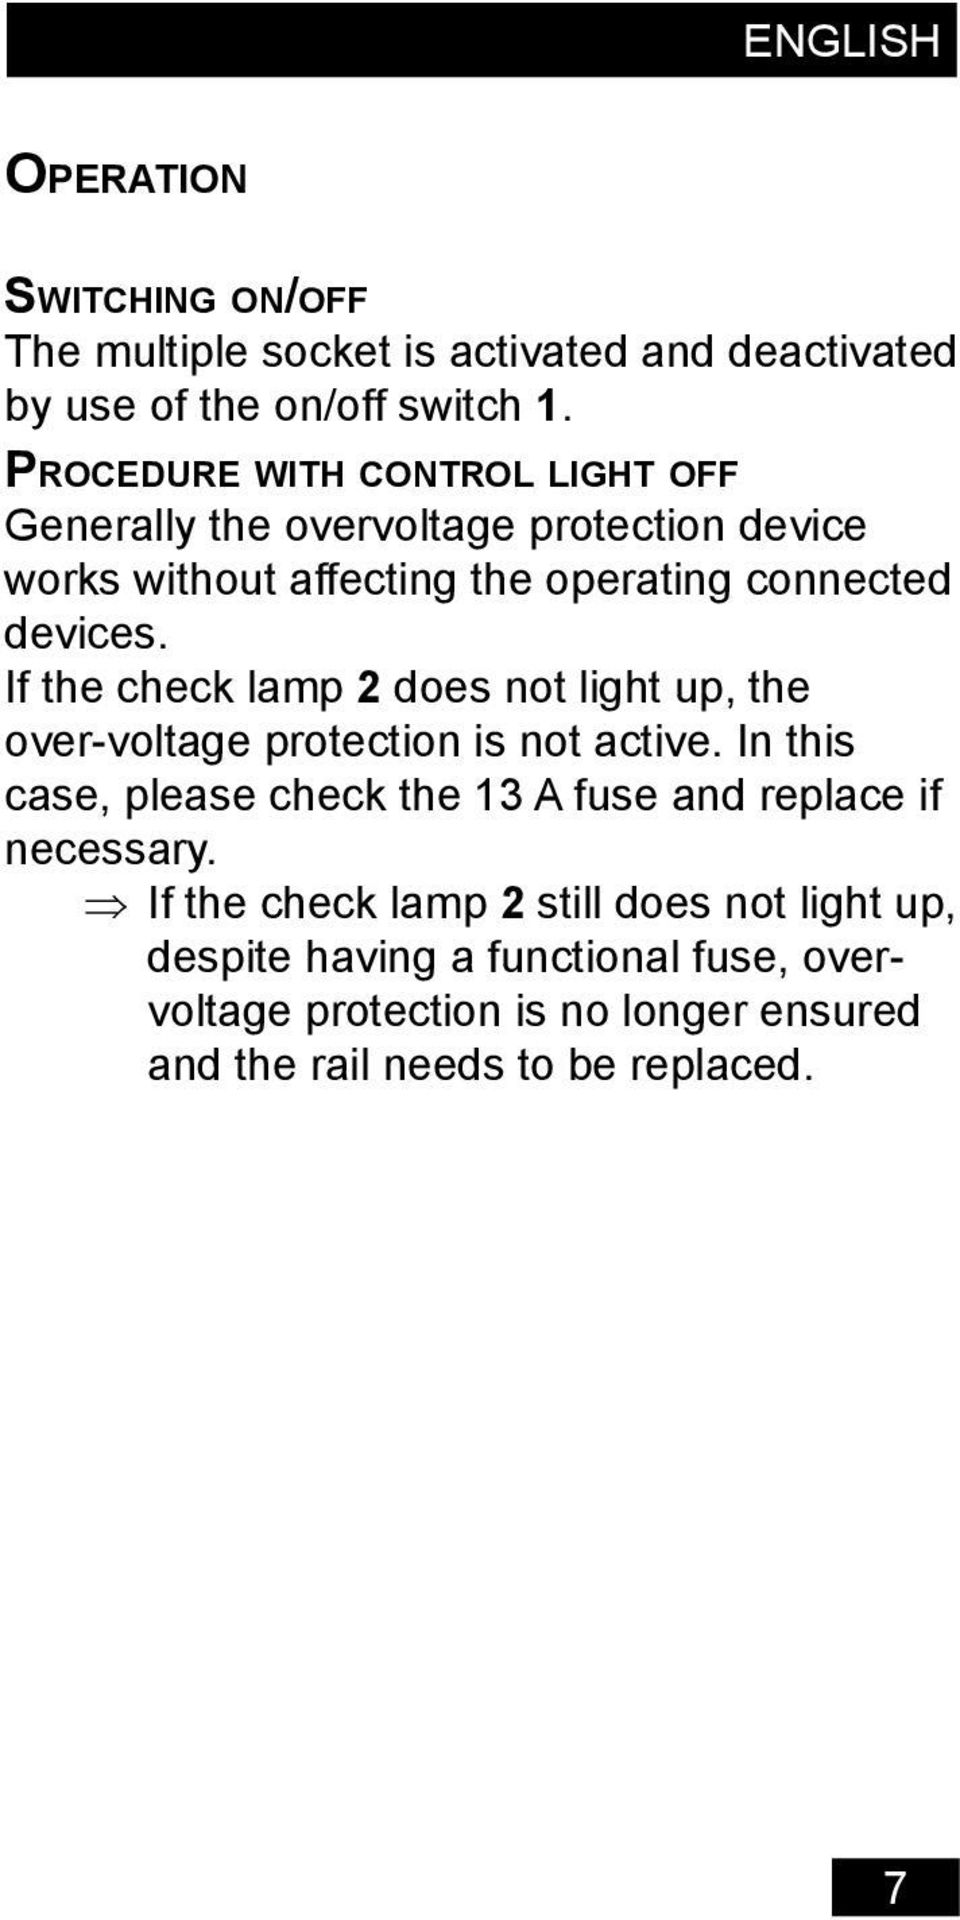 If the check lamp 2 does not light up, the over-voltage protection is not active.